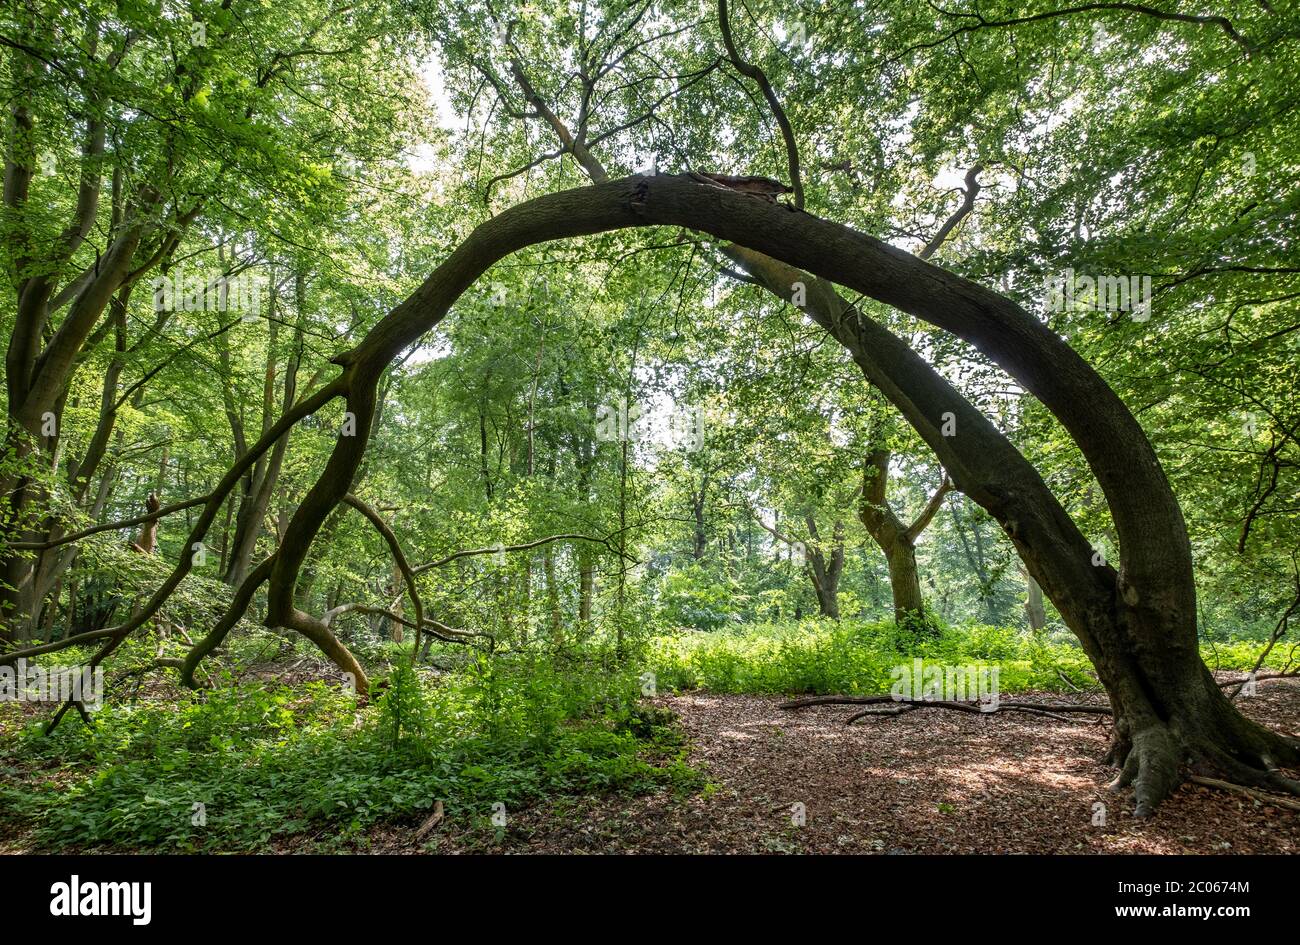 A large bent tree forming an arch in woodland near Worcester, UK. Stock Photo